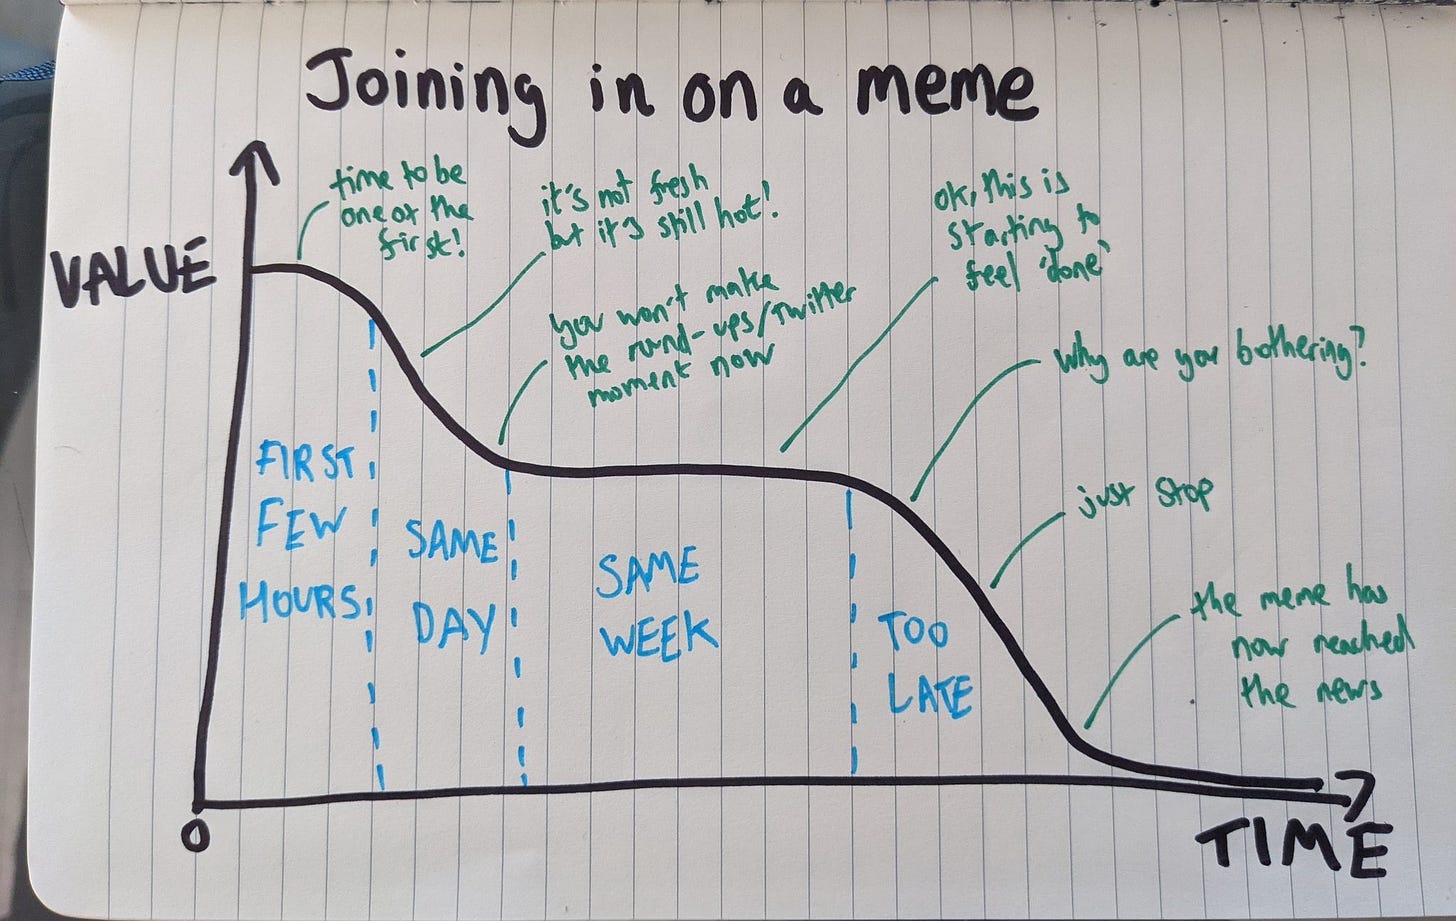 A hand-drawn graph on lined notebook paper titled 'Joining in on a meme'. The x-axis is labeled 'TIME' and the y-axis is labeled 'VALUE'. A bell curve starts high then drops over time. Annotations in green marker at various points on the curve add humorous commentary on the timeliness of participating in a meme. From left to right: 'time to be one of the first!', 'it's not fresh but it's still hot.', 'you won't make the round-ups/Twitter moments now', 'ok, this is starting to feel "done"', 'why are you bothering?', 'just stop', and 'the meme has now reached the news'. Time intervals in blue marker read 'FIRST FEW HOURS', 'SAME DAY', 'SAME WEEK', 'TOO LATE'.